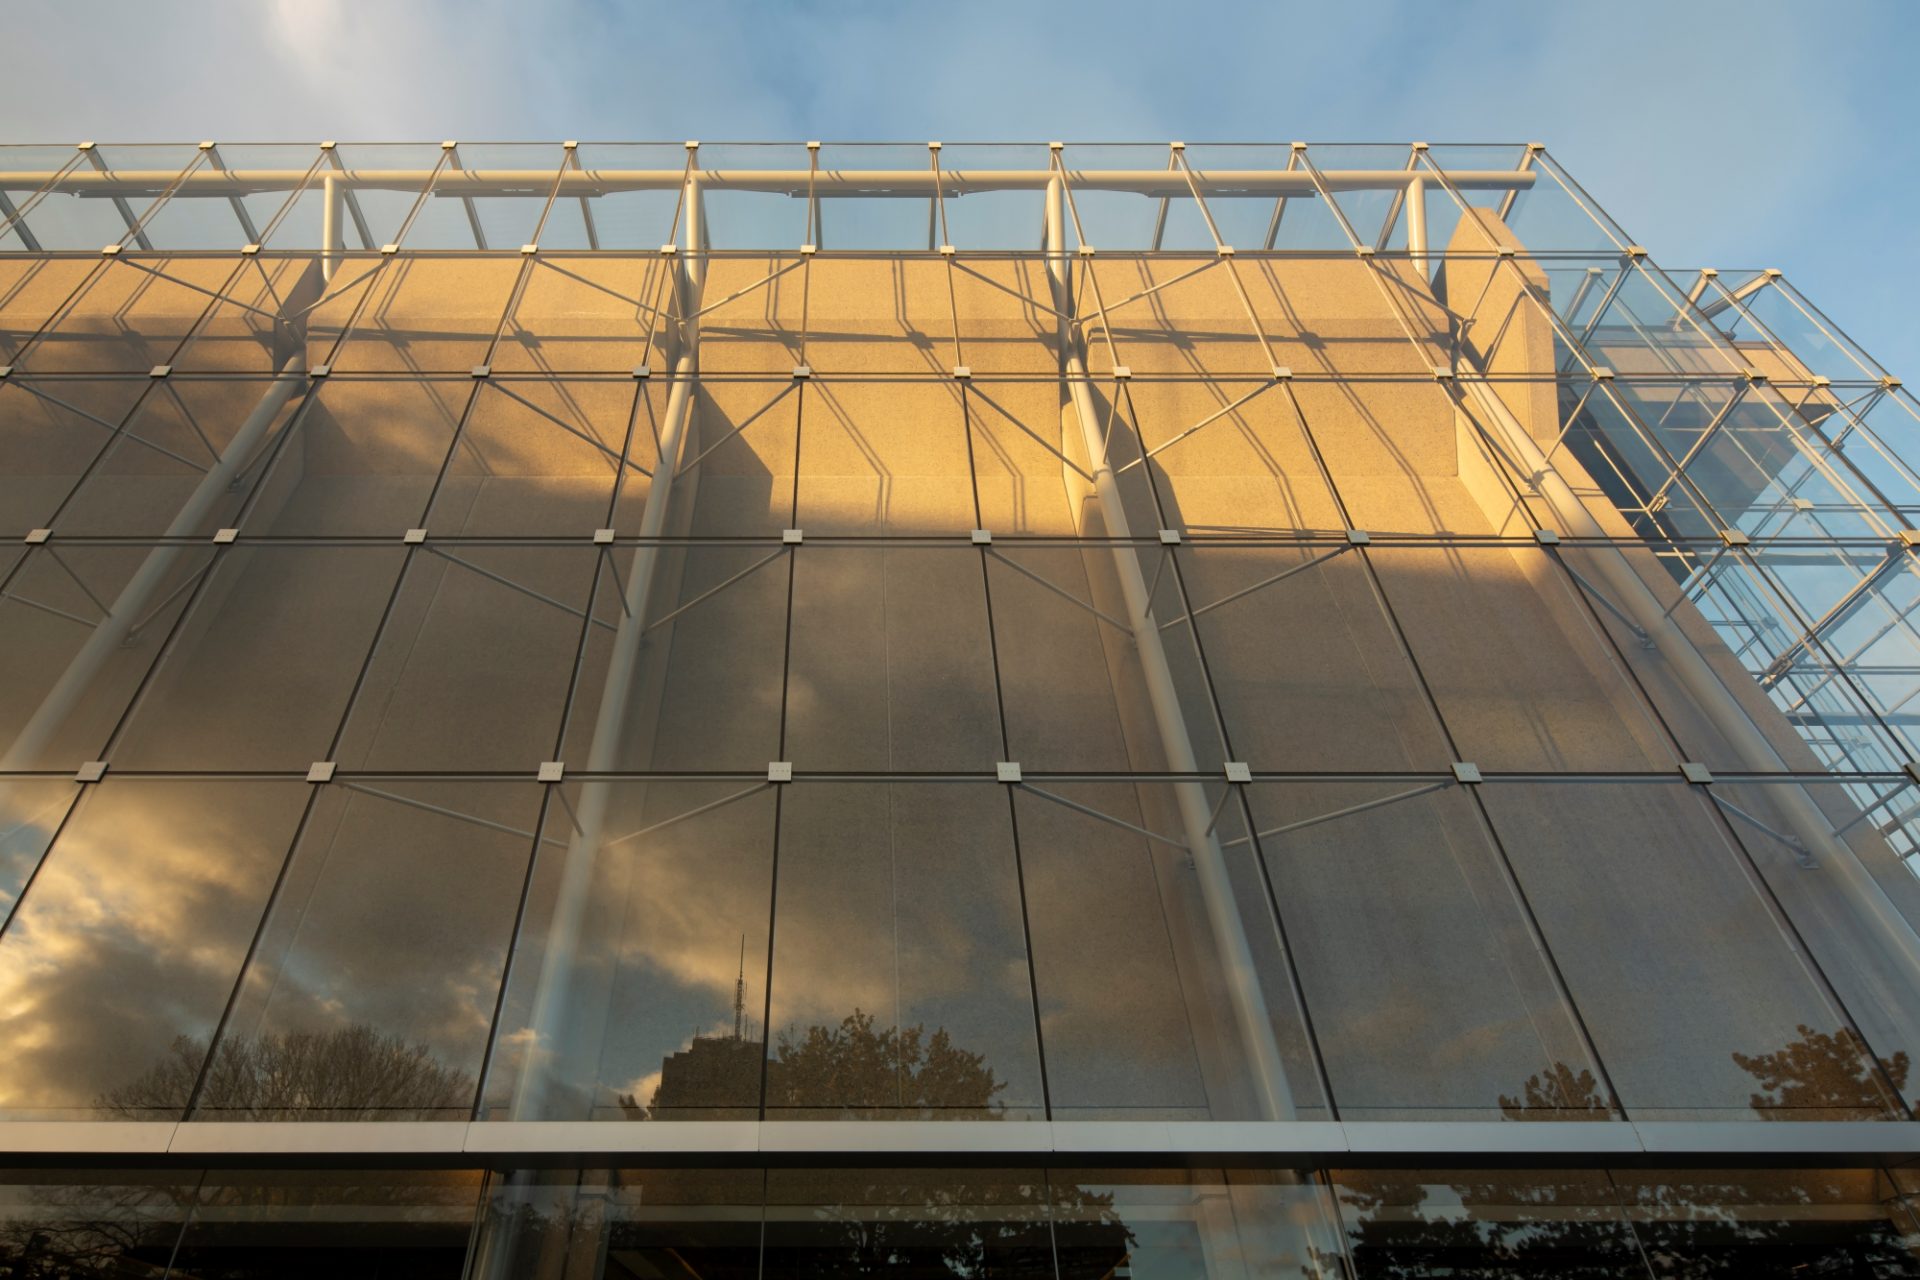 Grand Theatre Quebec-Lemay-Atelier-21-Architecture-Conservation-Credit StephaneGroleau-glass wall_06